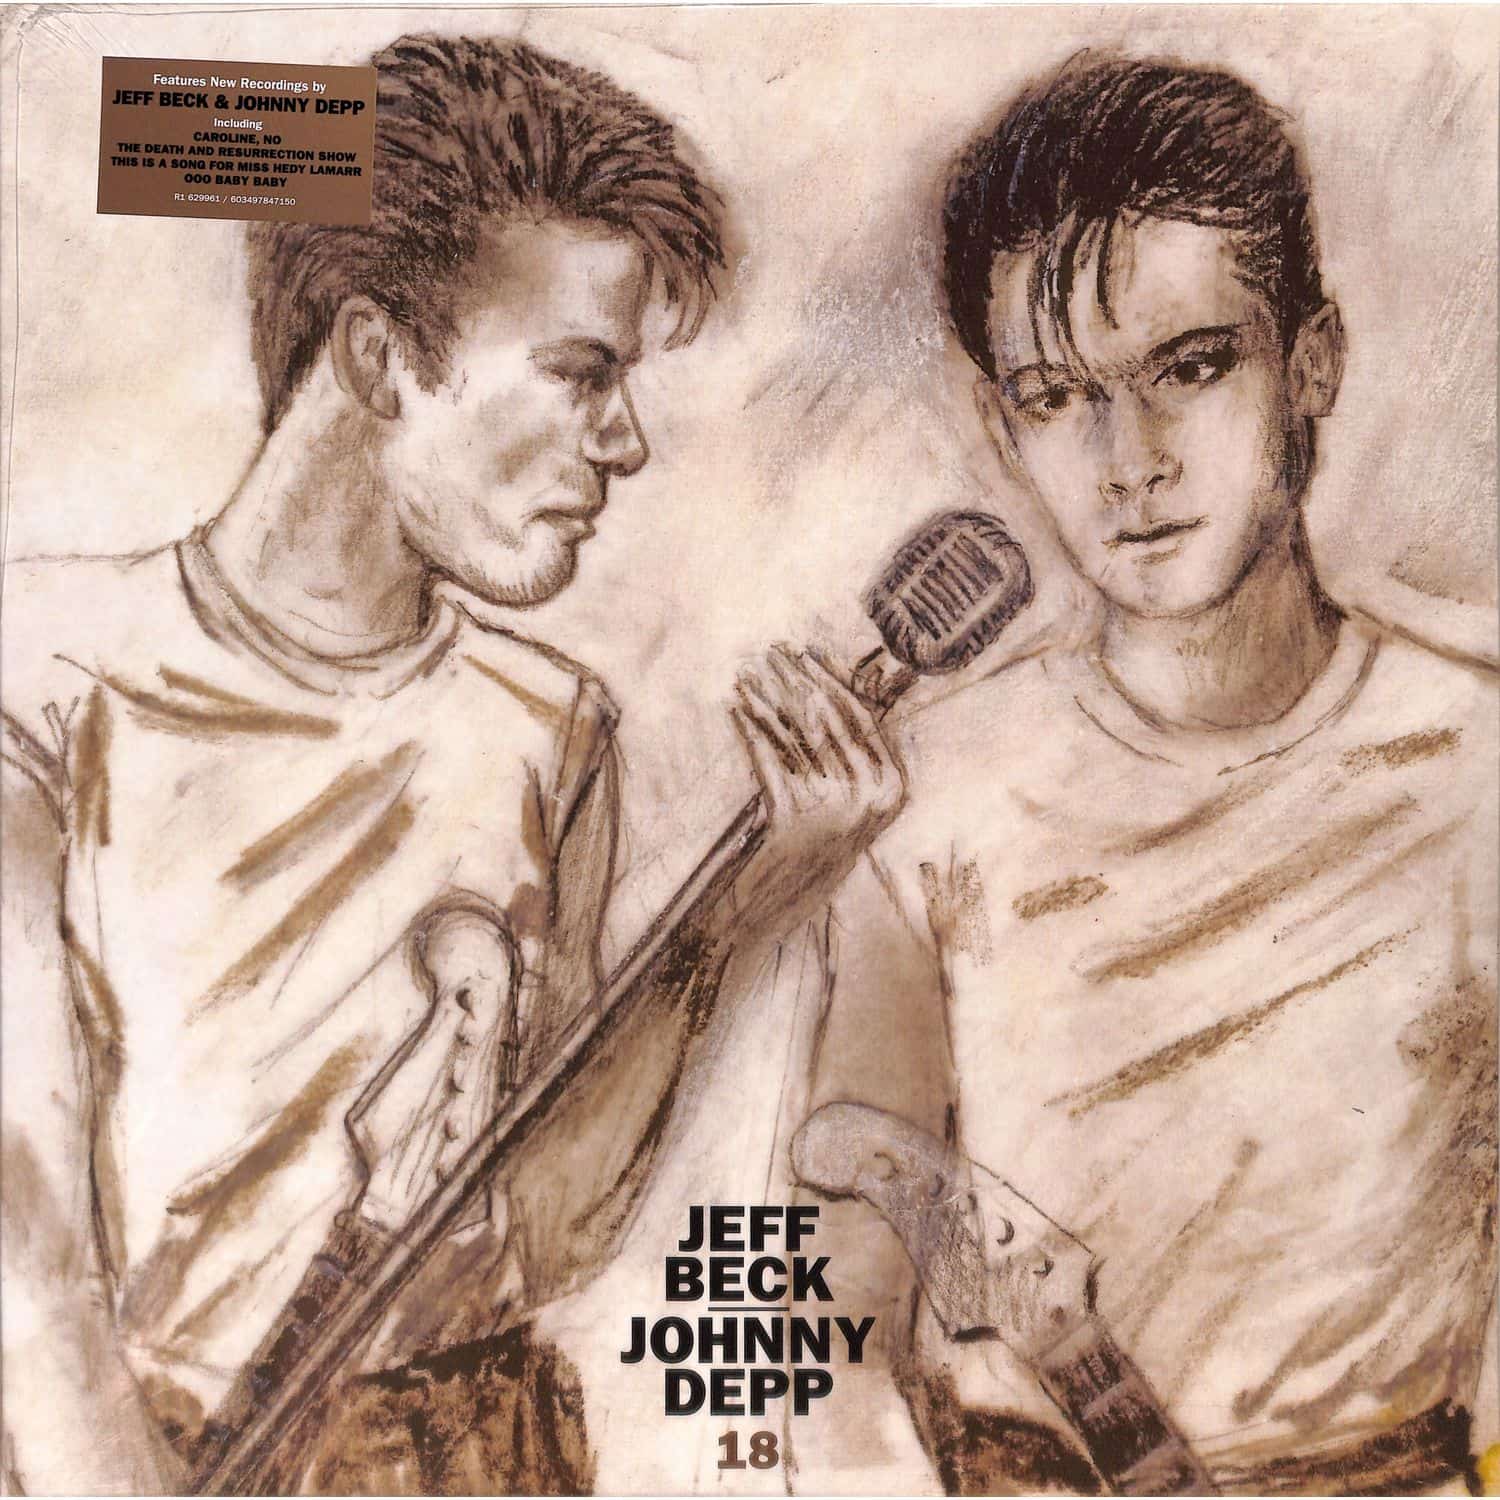 Jeff Beck and Johnny Depp - 18 